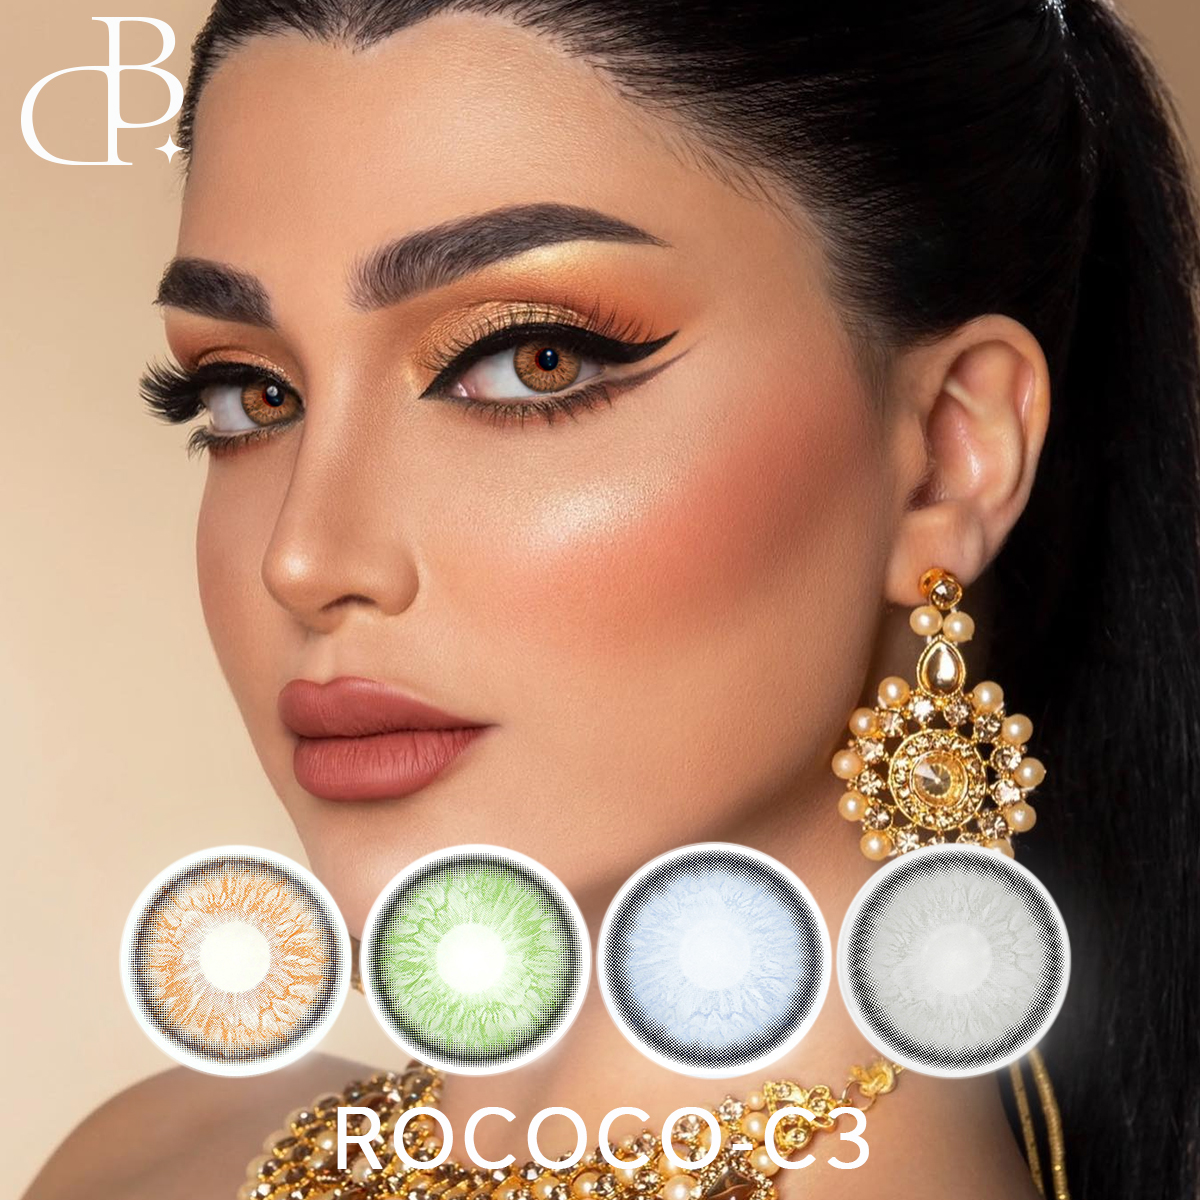 https://www.dblenses.com/rococo-3-new-looking-cosmetic-wholesale-color-contact-lenses-cheap-soft-yearly-eye-colored-contact-lenses-product/